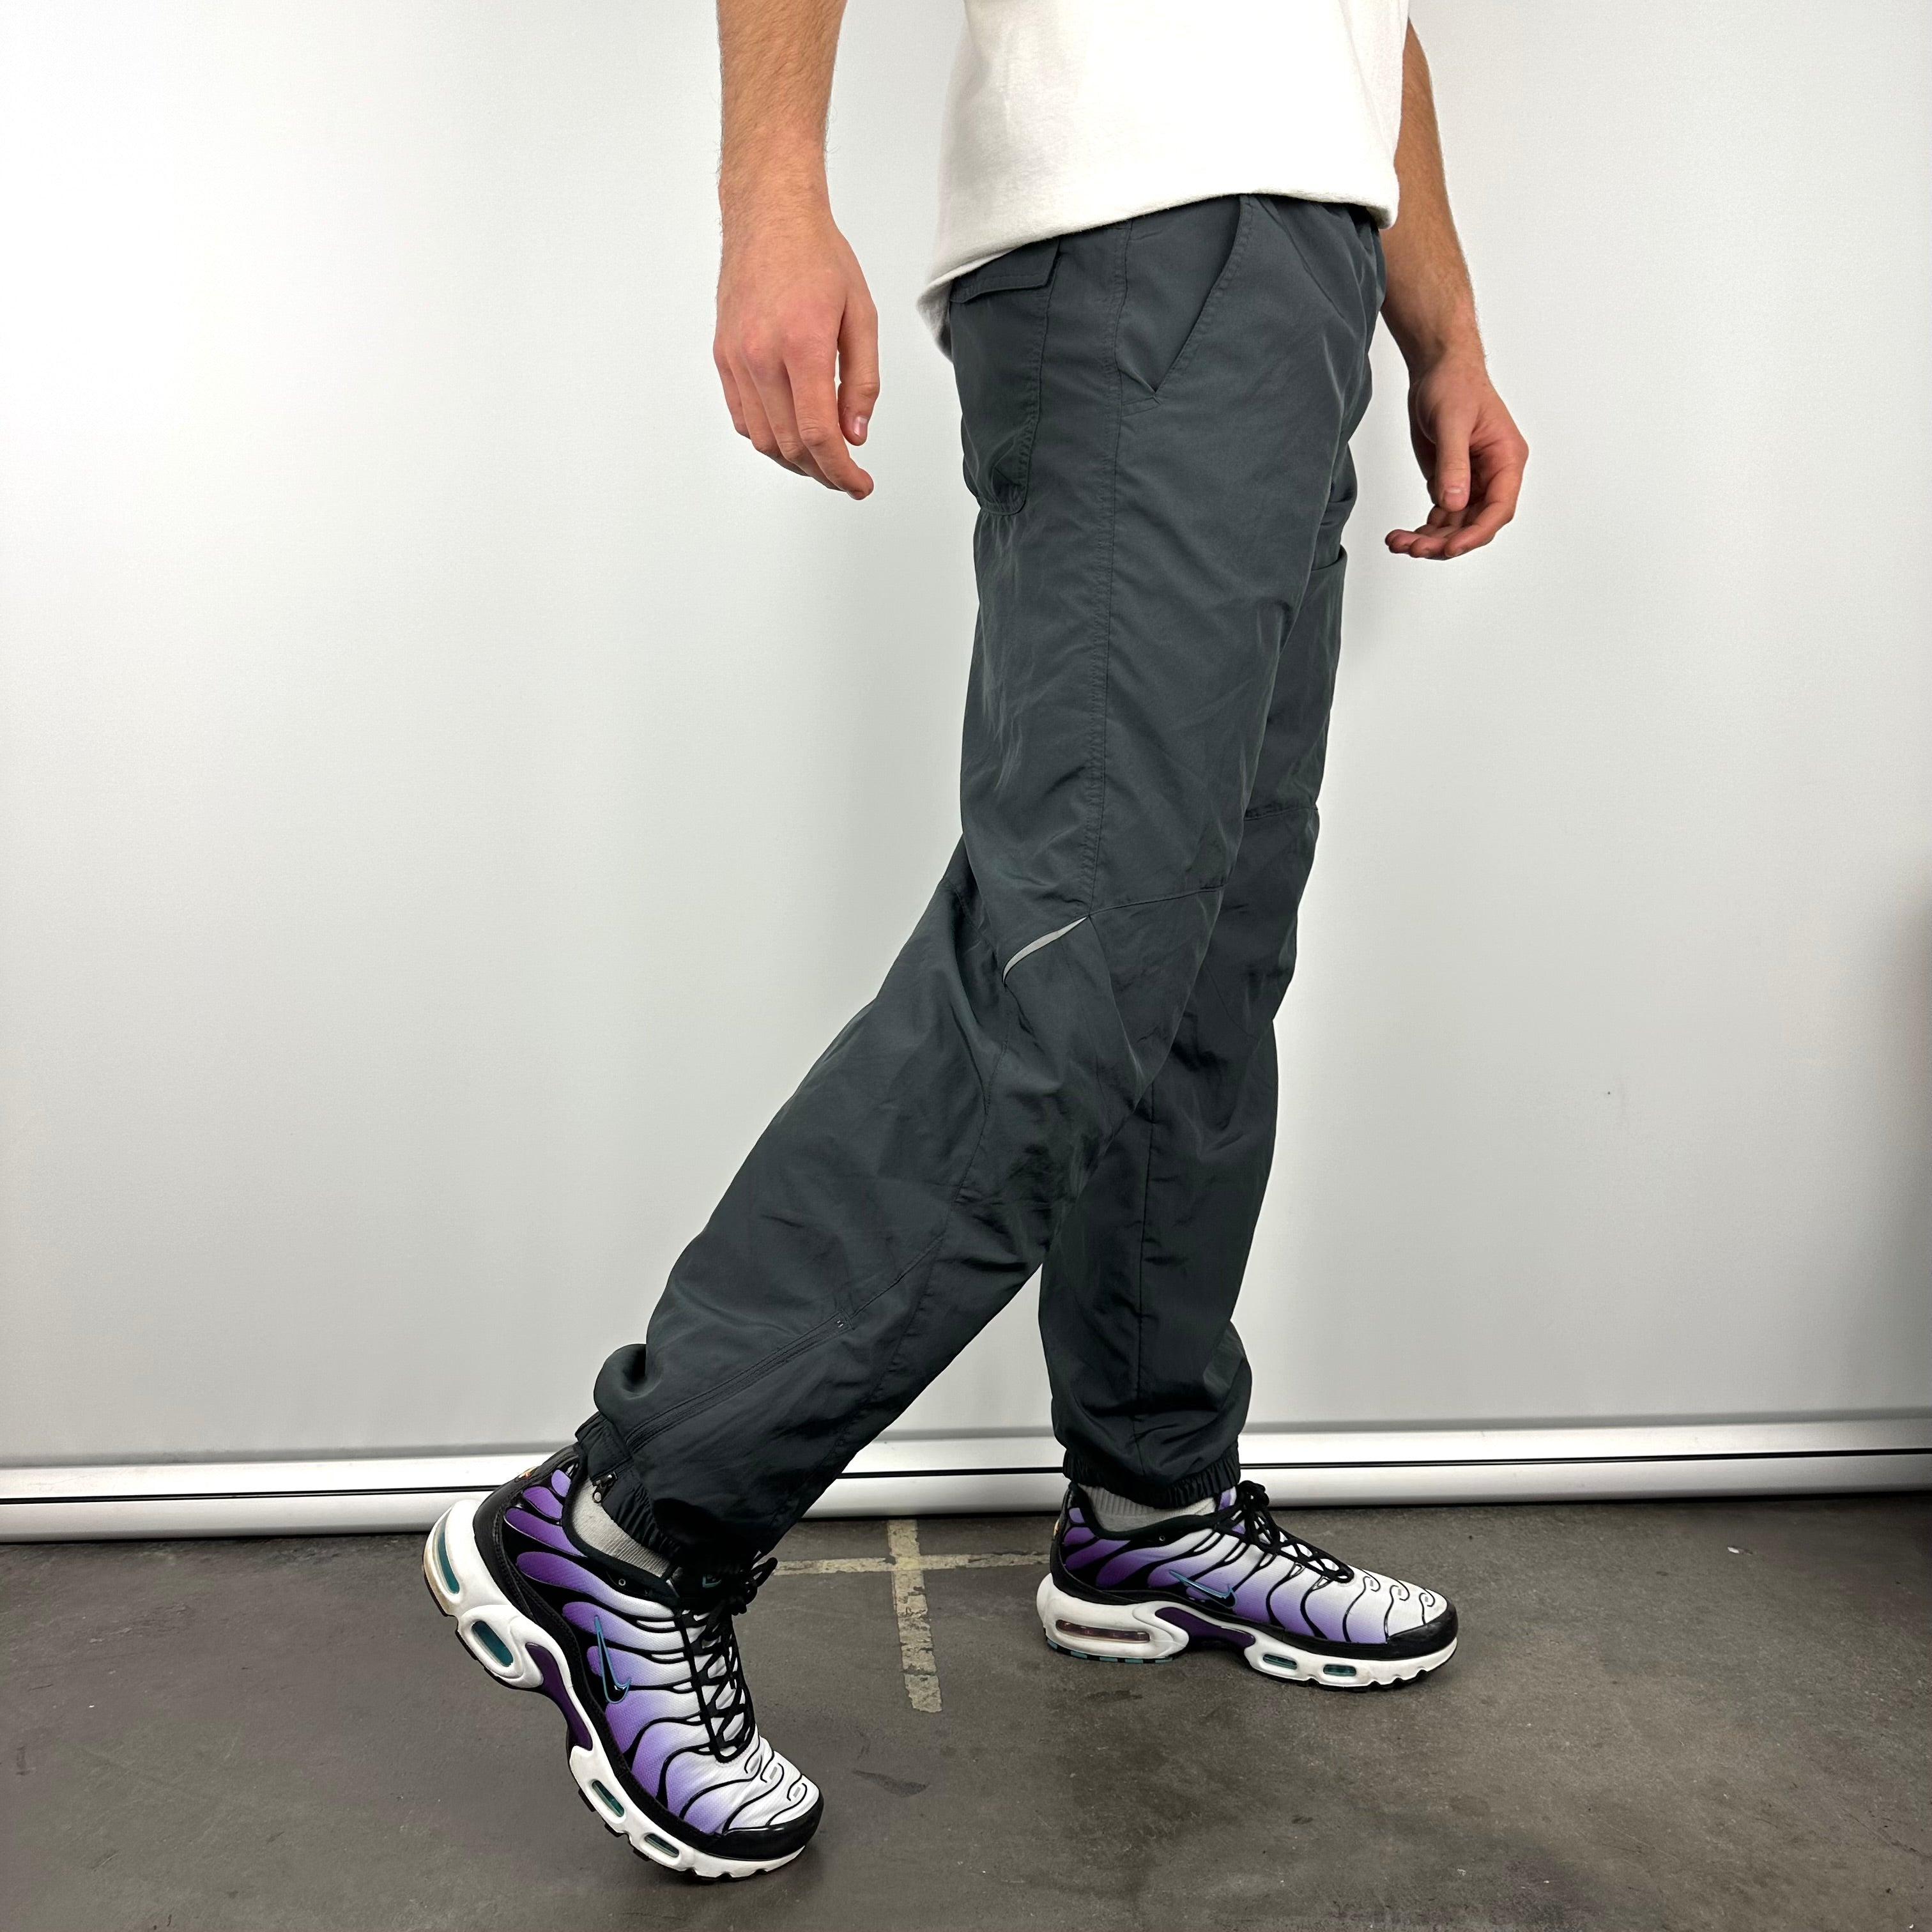 Nike Grey Embroidered Swoosh Track Pants (M)